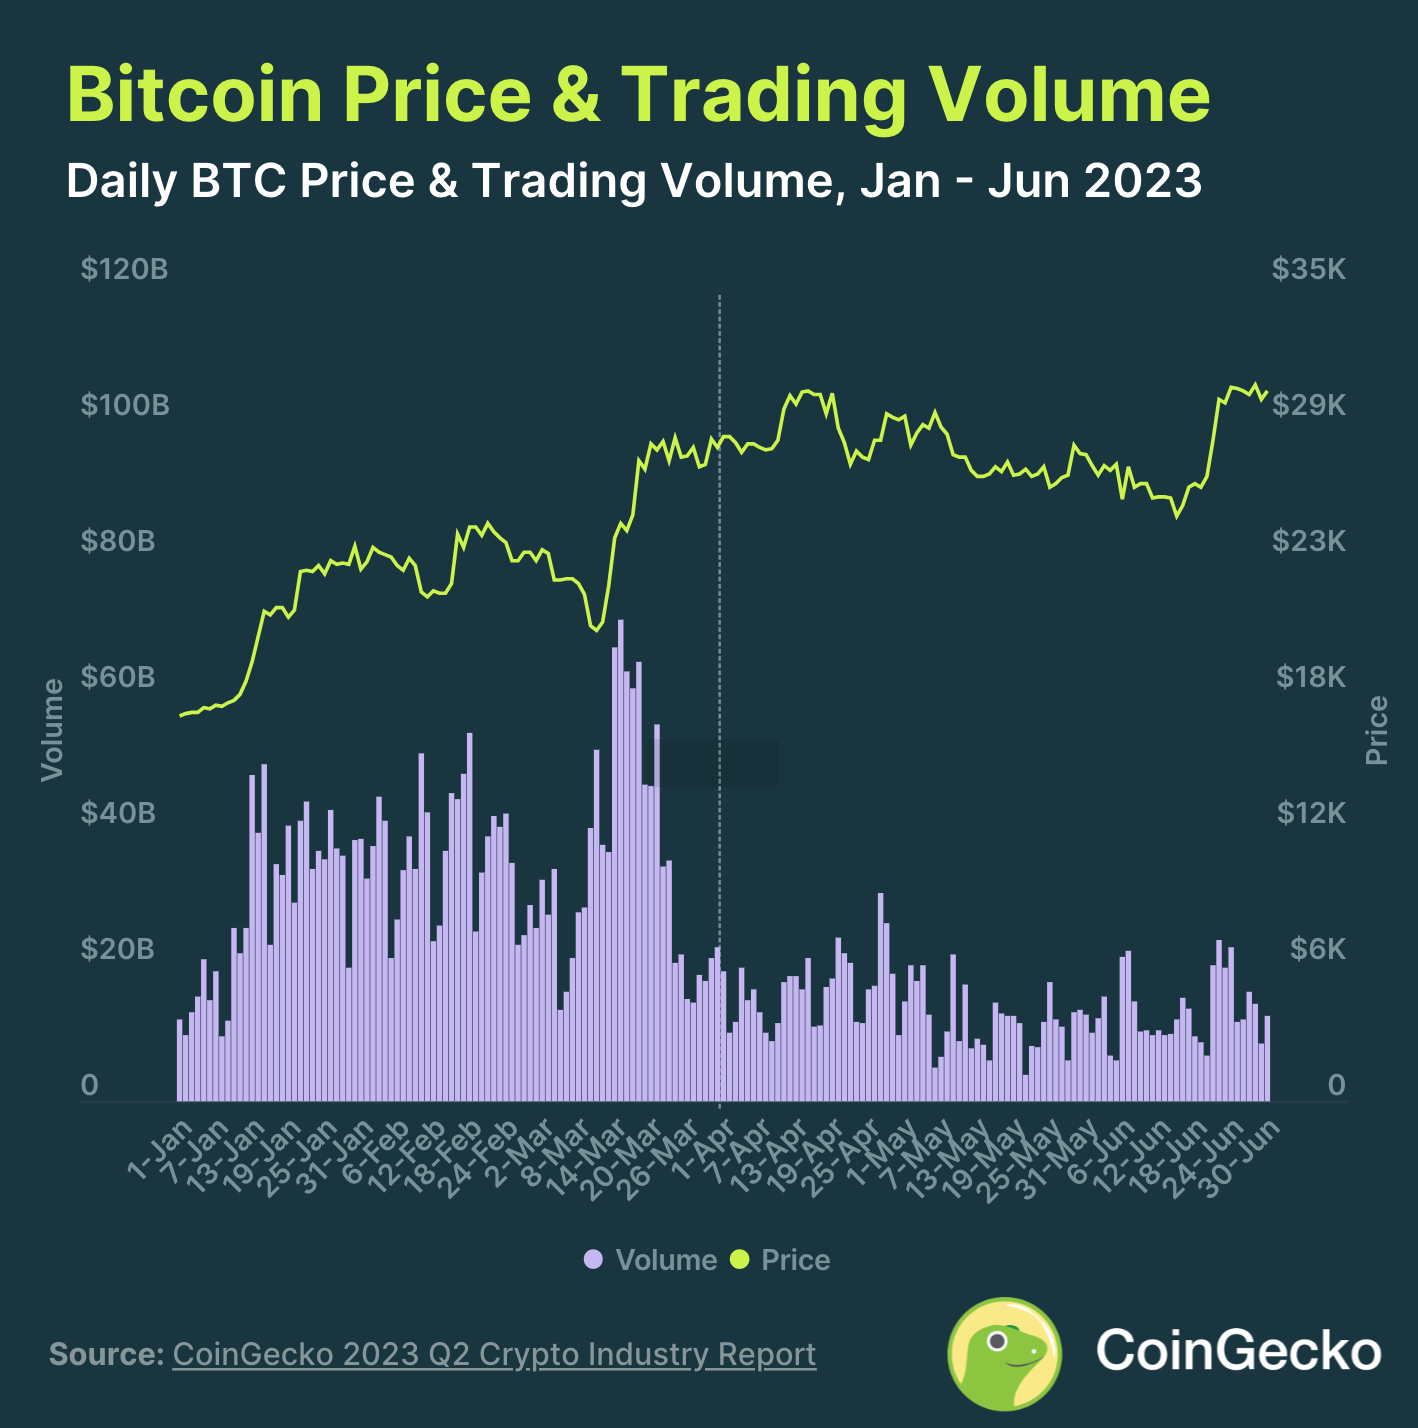 Bitcoin Price and Trading Volume January - June 2023